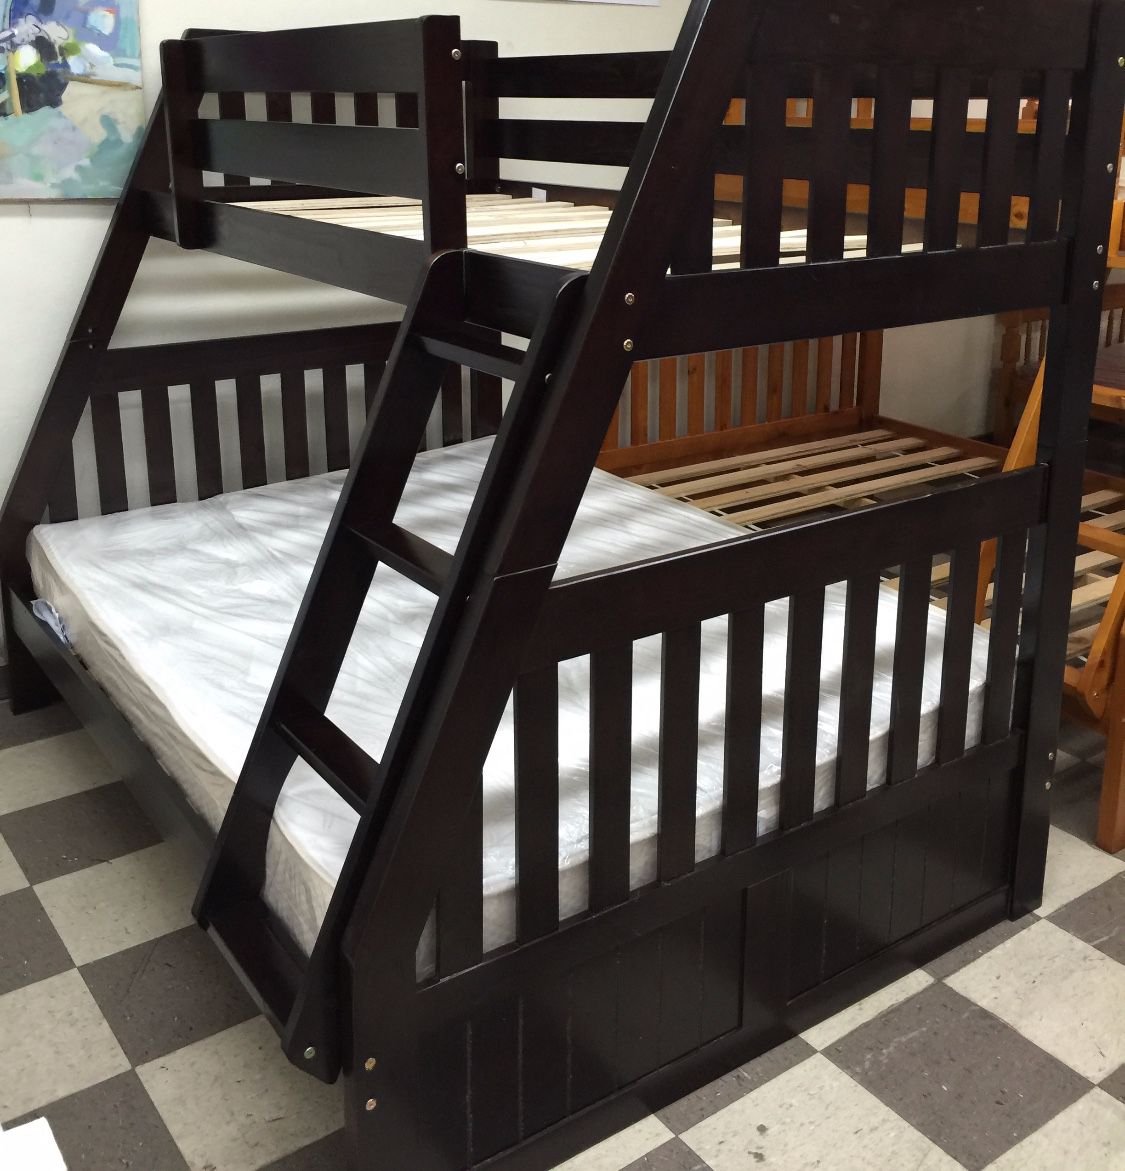 NEW BUNK BED WOOD TWIN OVER FULL WITH NEW MATTRESS INCLUDED